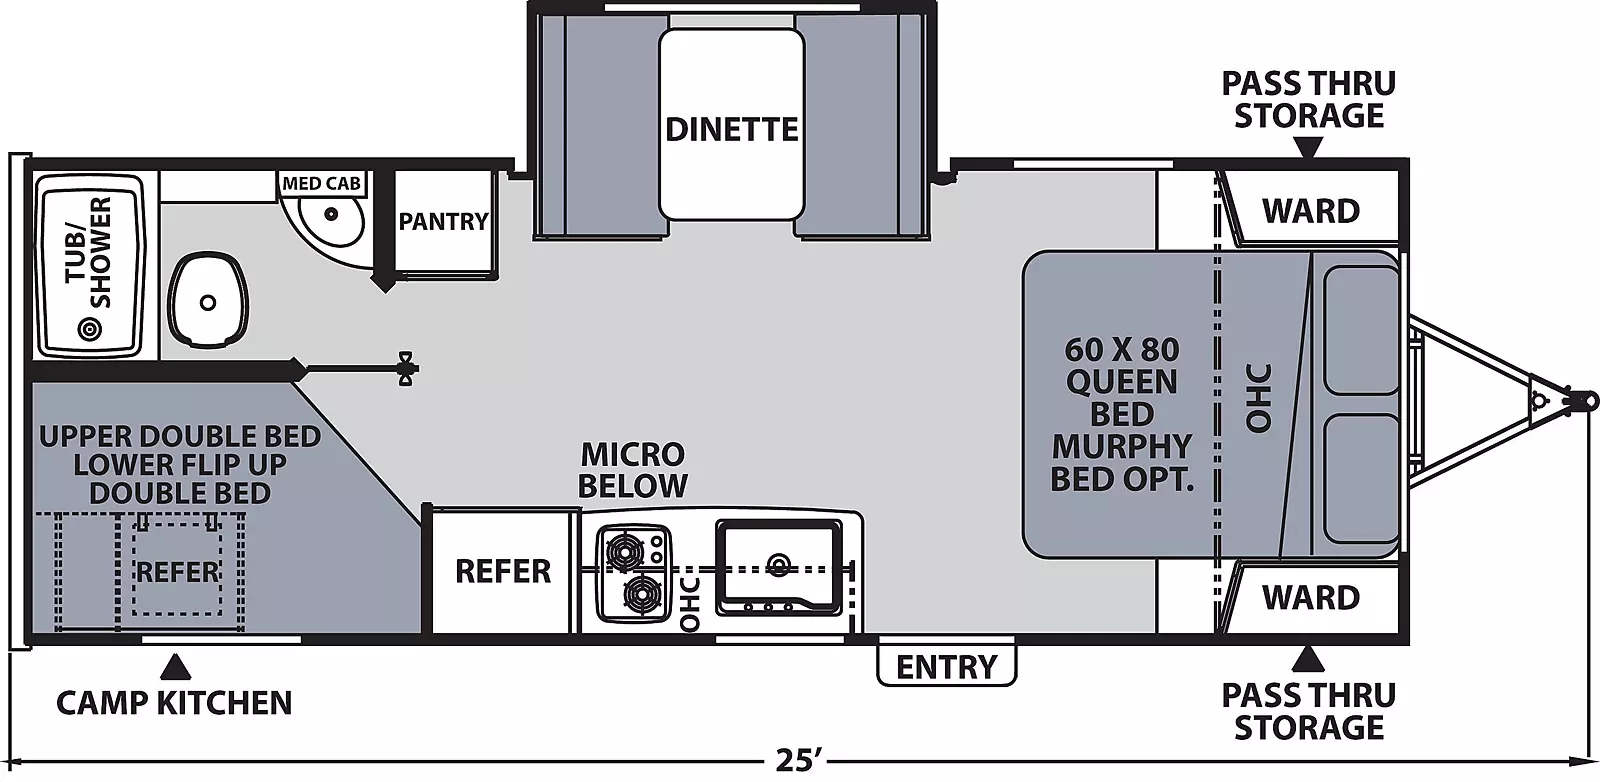 The 208BHS has one slide out on the off-door side and one entry door on the door side. Interior layout from front to back: front bedroom containing foot facing queen bed with murphy bed option, wardrobes on either side and overhead storage; kitchen living dining area with off-door slide out containing dinette; door side kitchen containing sink, cook top stove, overhead cabinet, microwave below, and refrigerator. Pantry located on the off-door side; rear off-door side bathroom with tub/shower, toilet and medicine cabinet. Double bed over flip up double bed bunks located on the door side; Exterior camp kitchen at the rear.